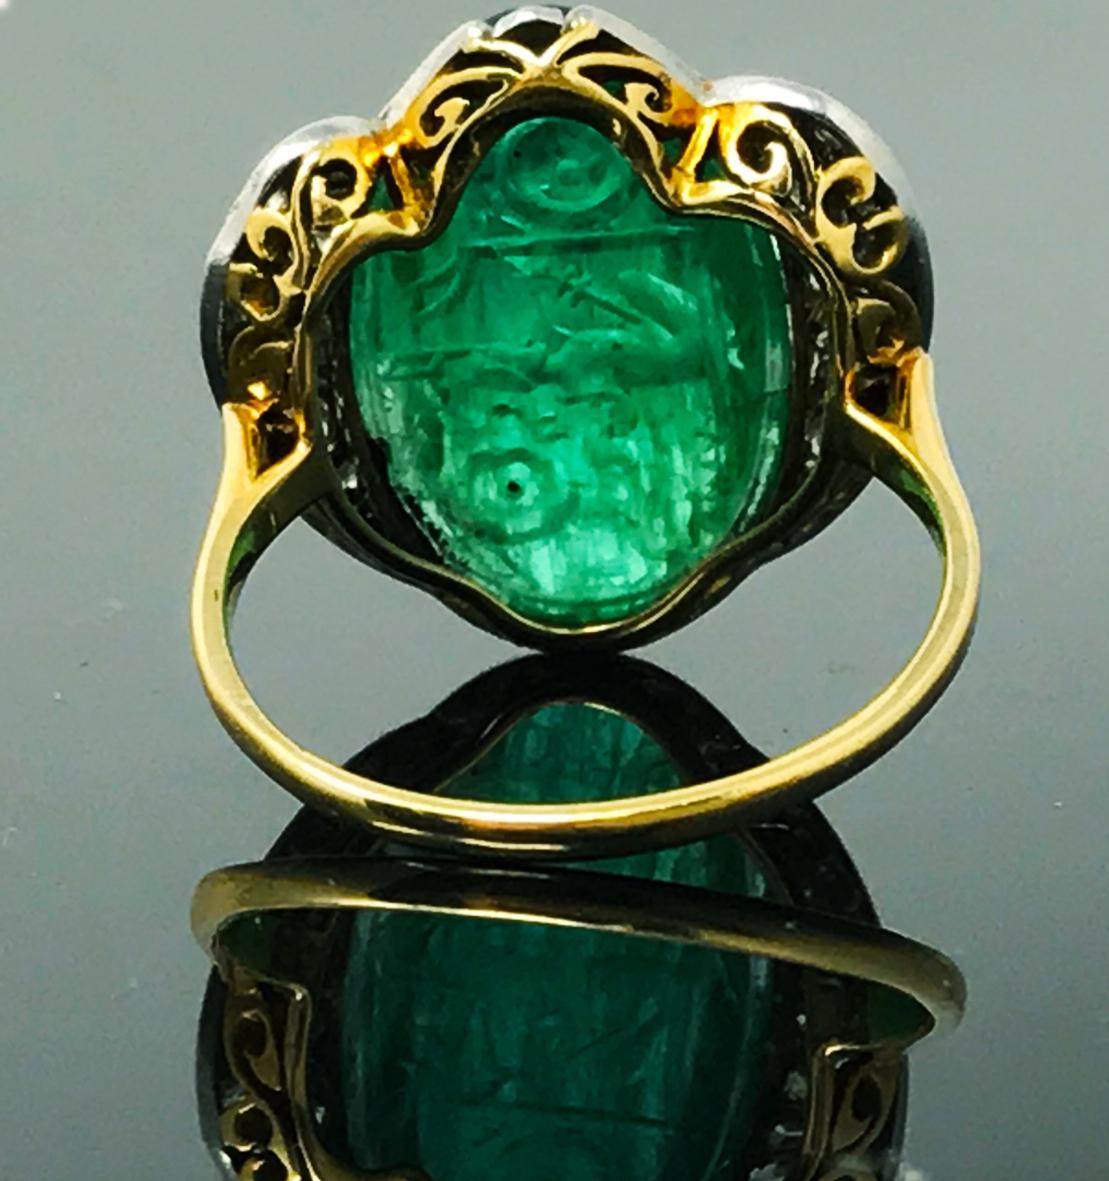 scarab ring meaning